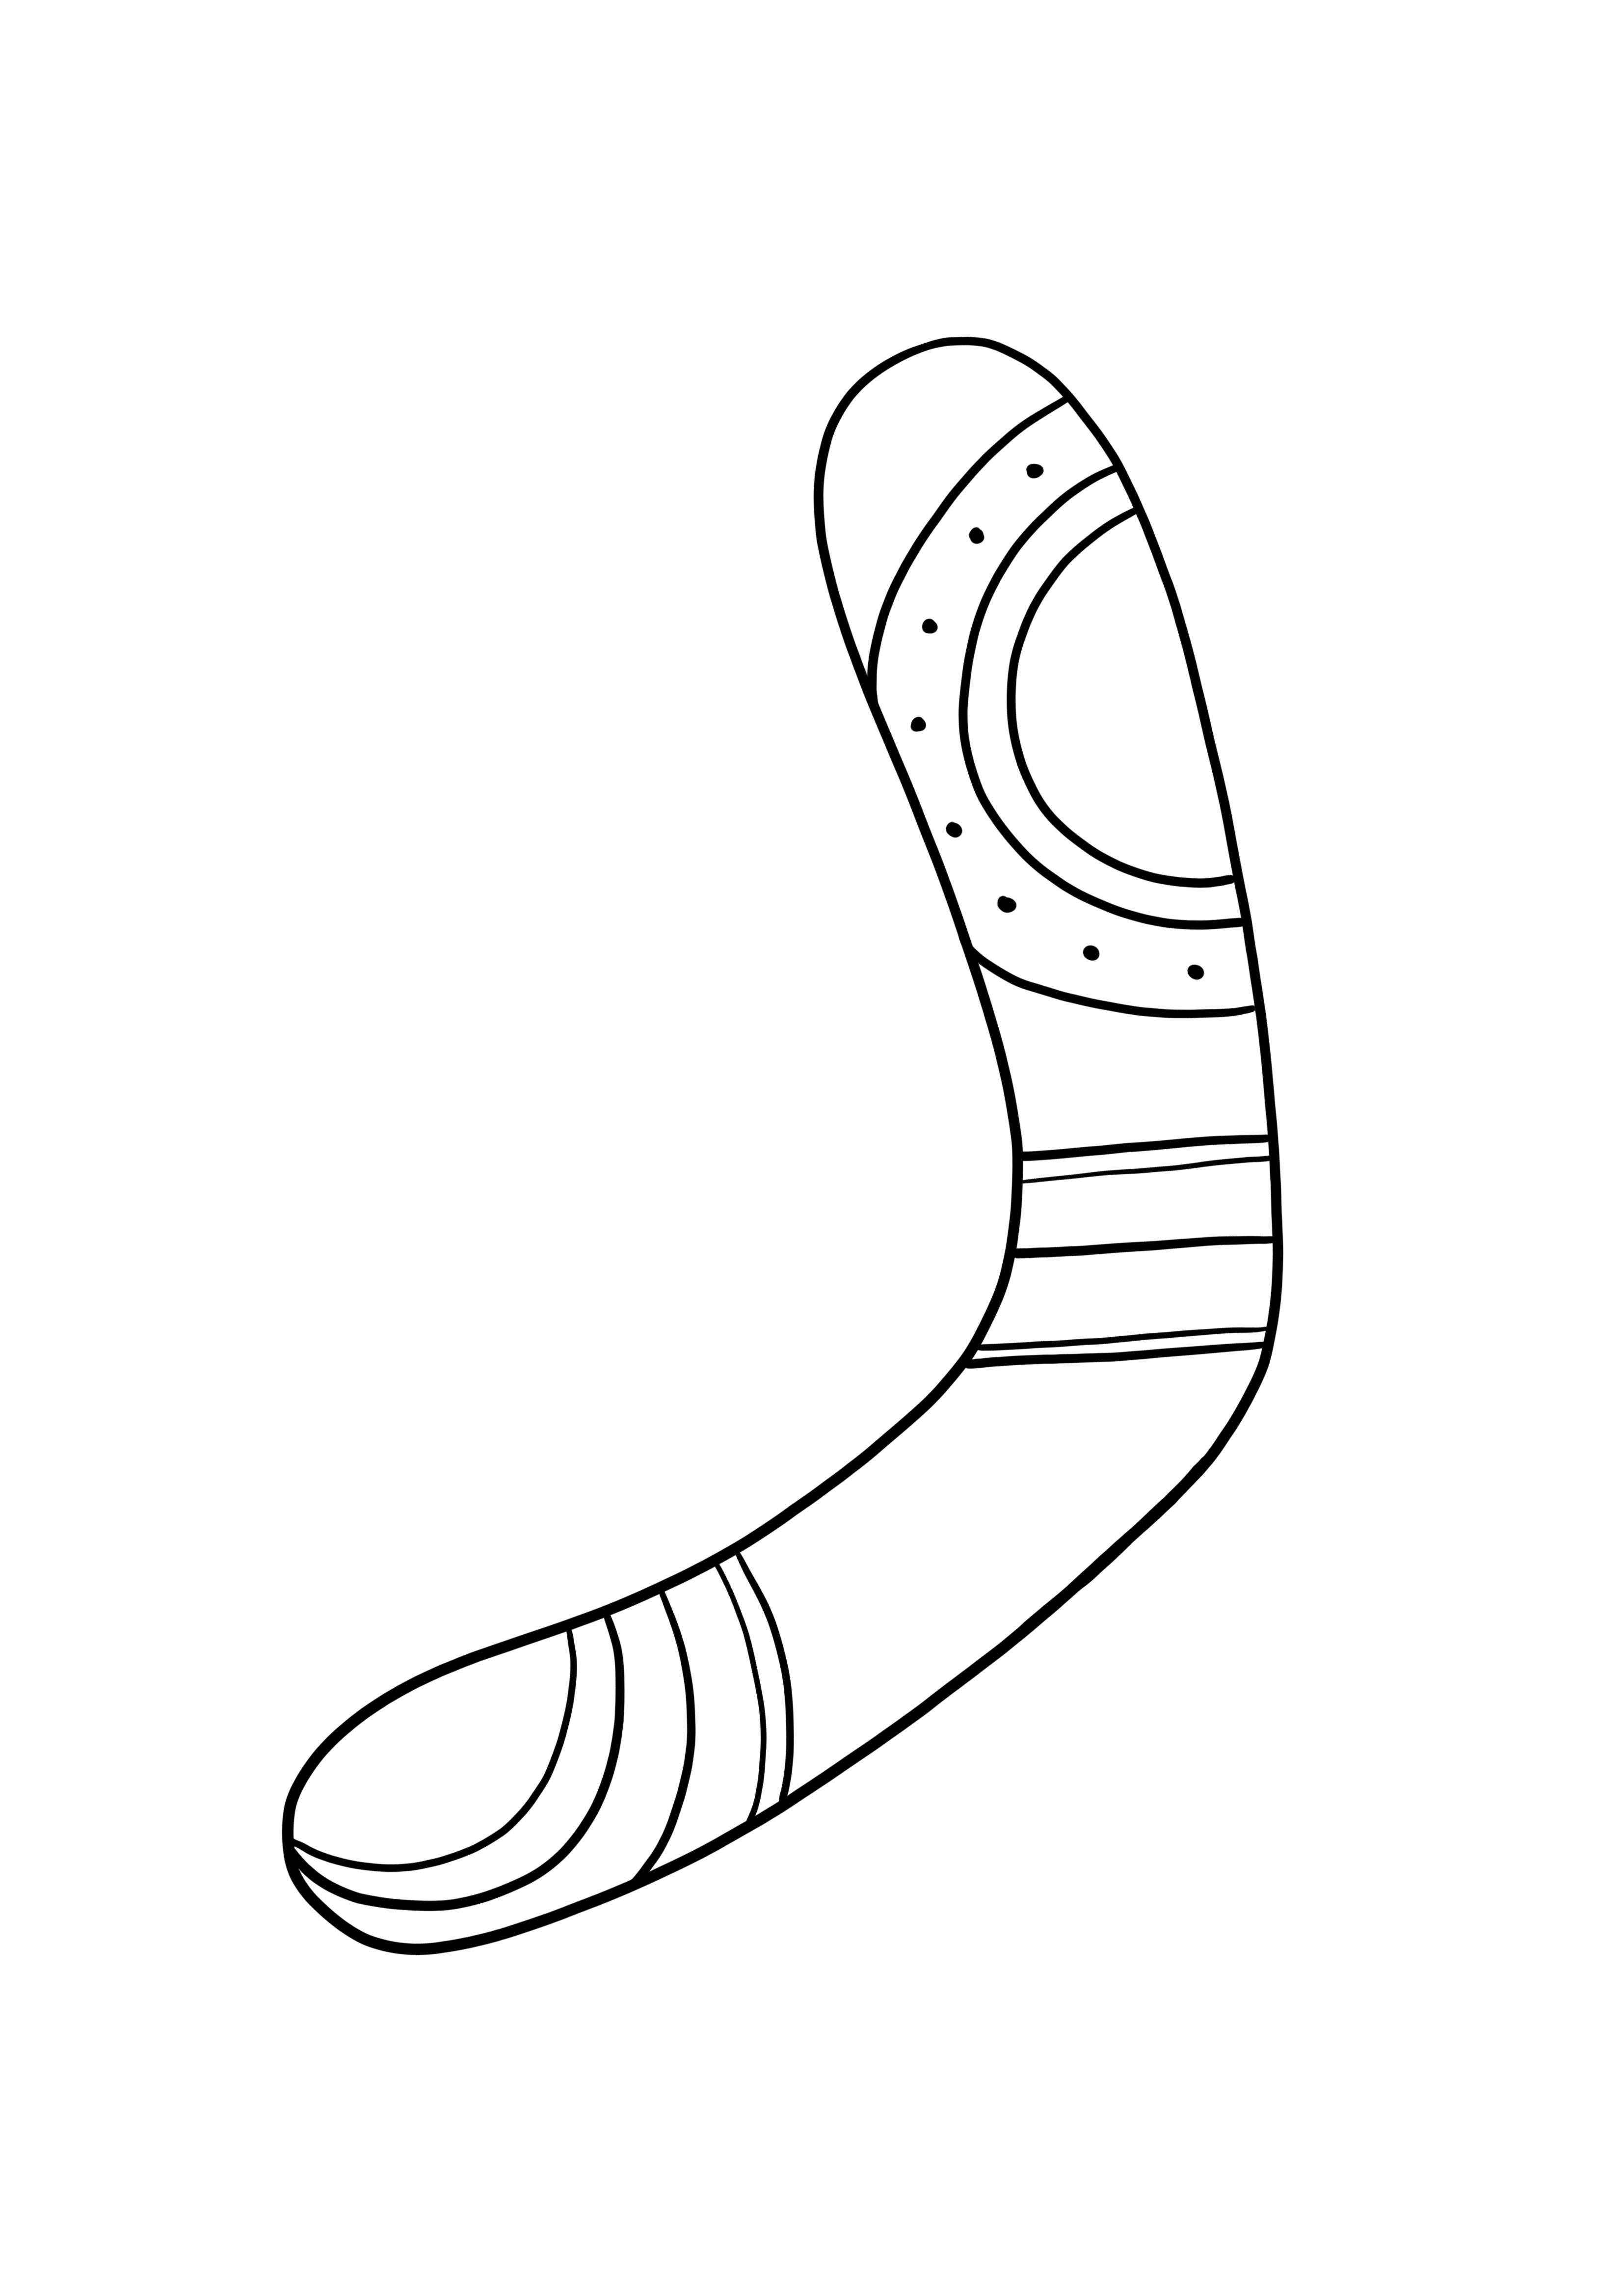 Boomerang to download or print for free for kids